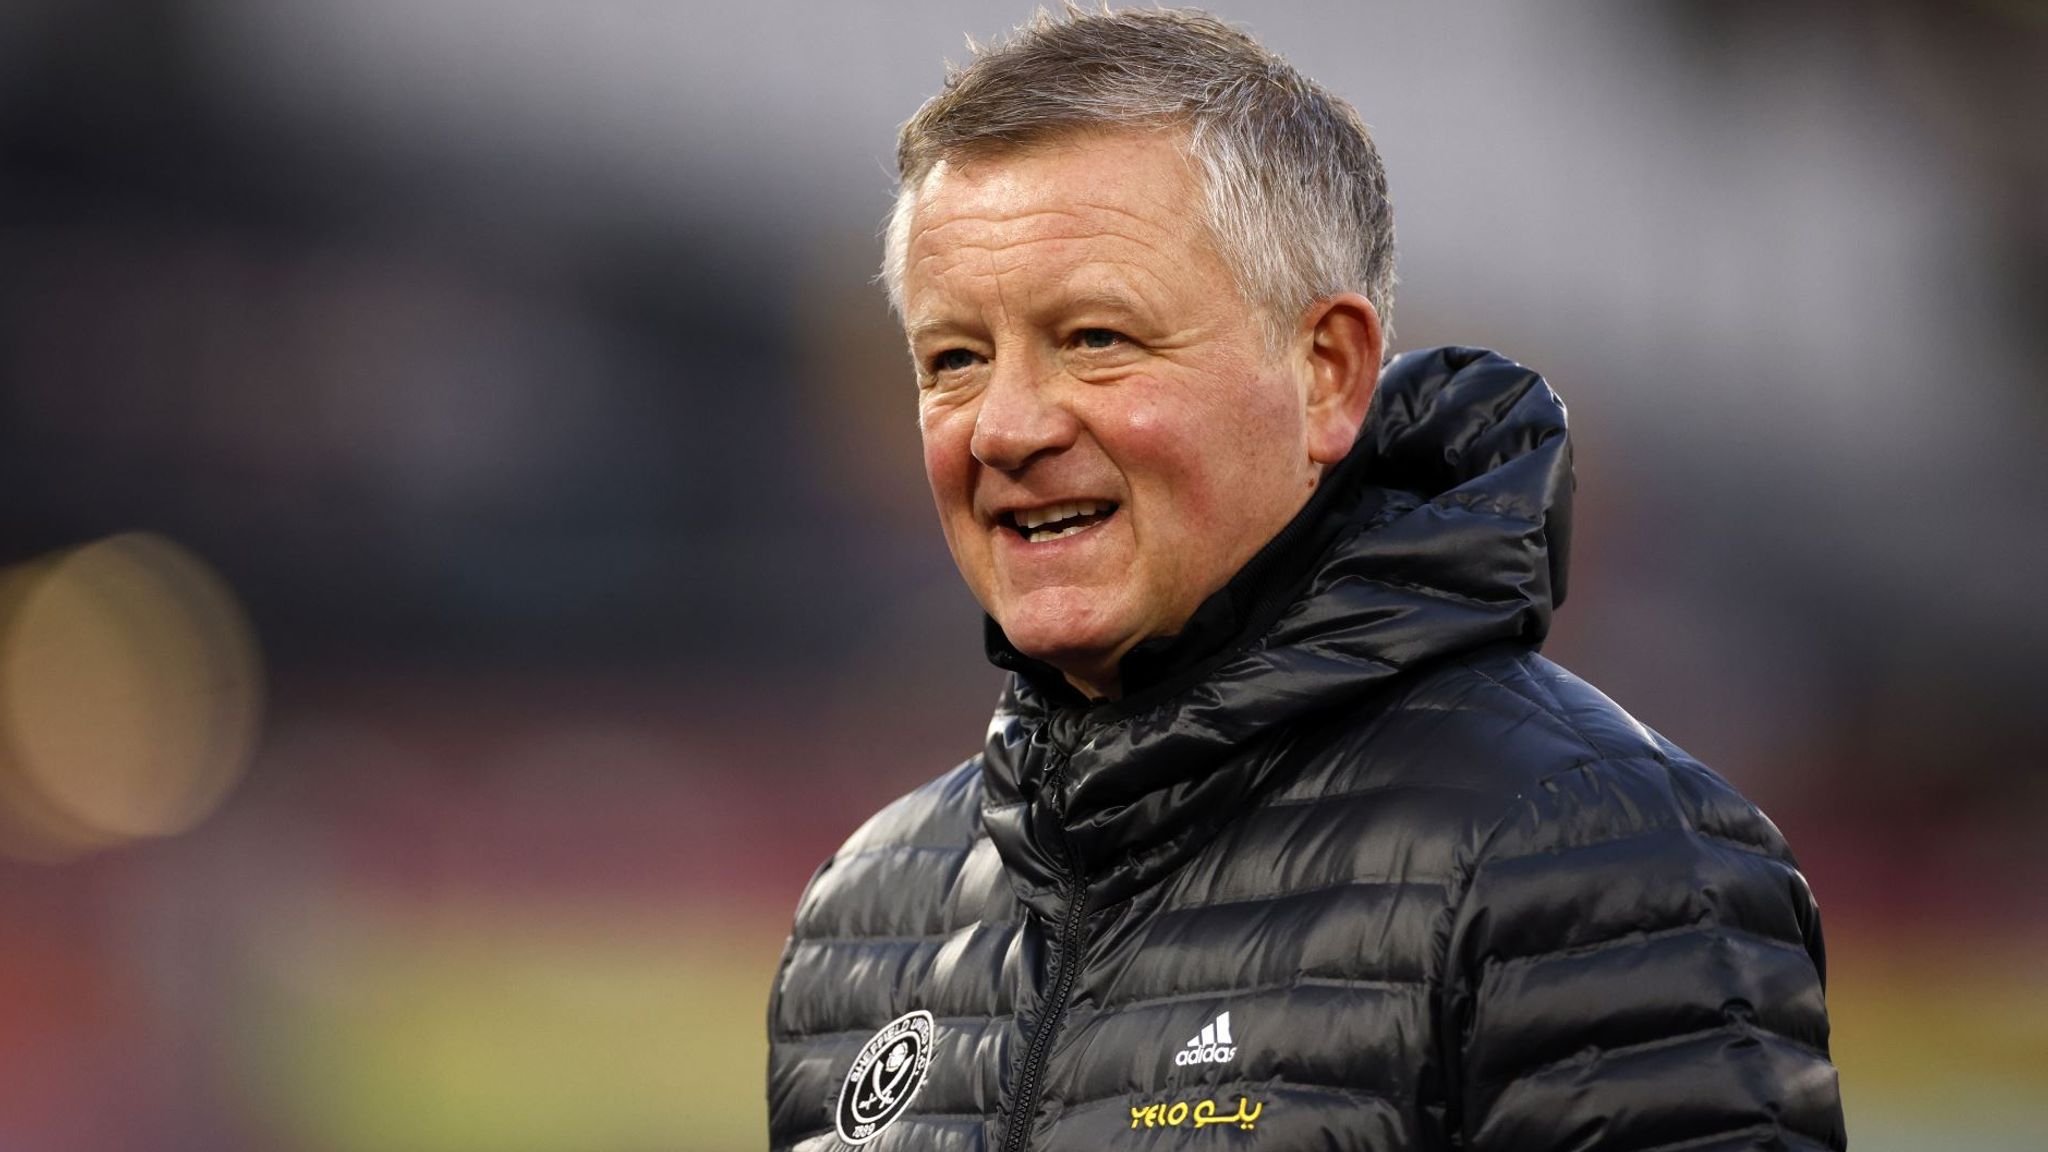 Chris Wilder: Former Sheffield United boss writes open letter to Blades fans in which he says 'I lived the dream' | Football News | Sky Sports